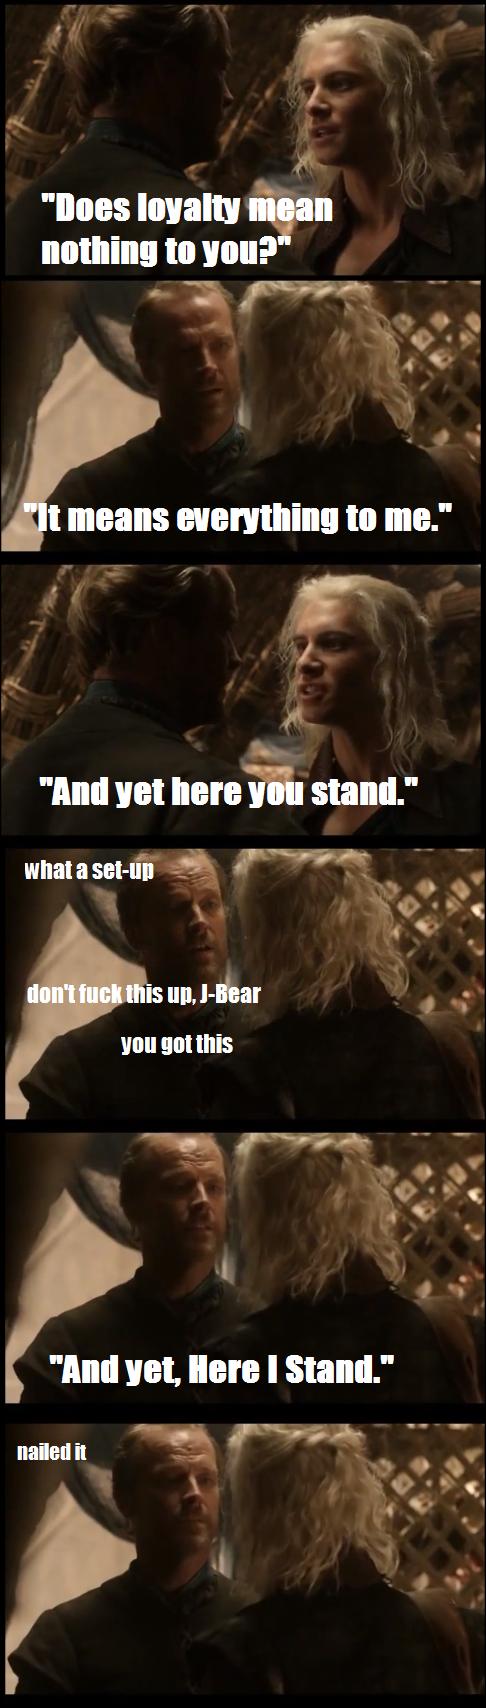 jorah here i stand - "Does loyalty mean nothing to you?" "It means everything to me." "And yet here you stand." what a setup don't fuck this up, JBear you got this "And yet, Here I Stand." nailed it